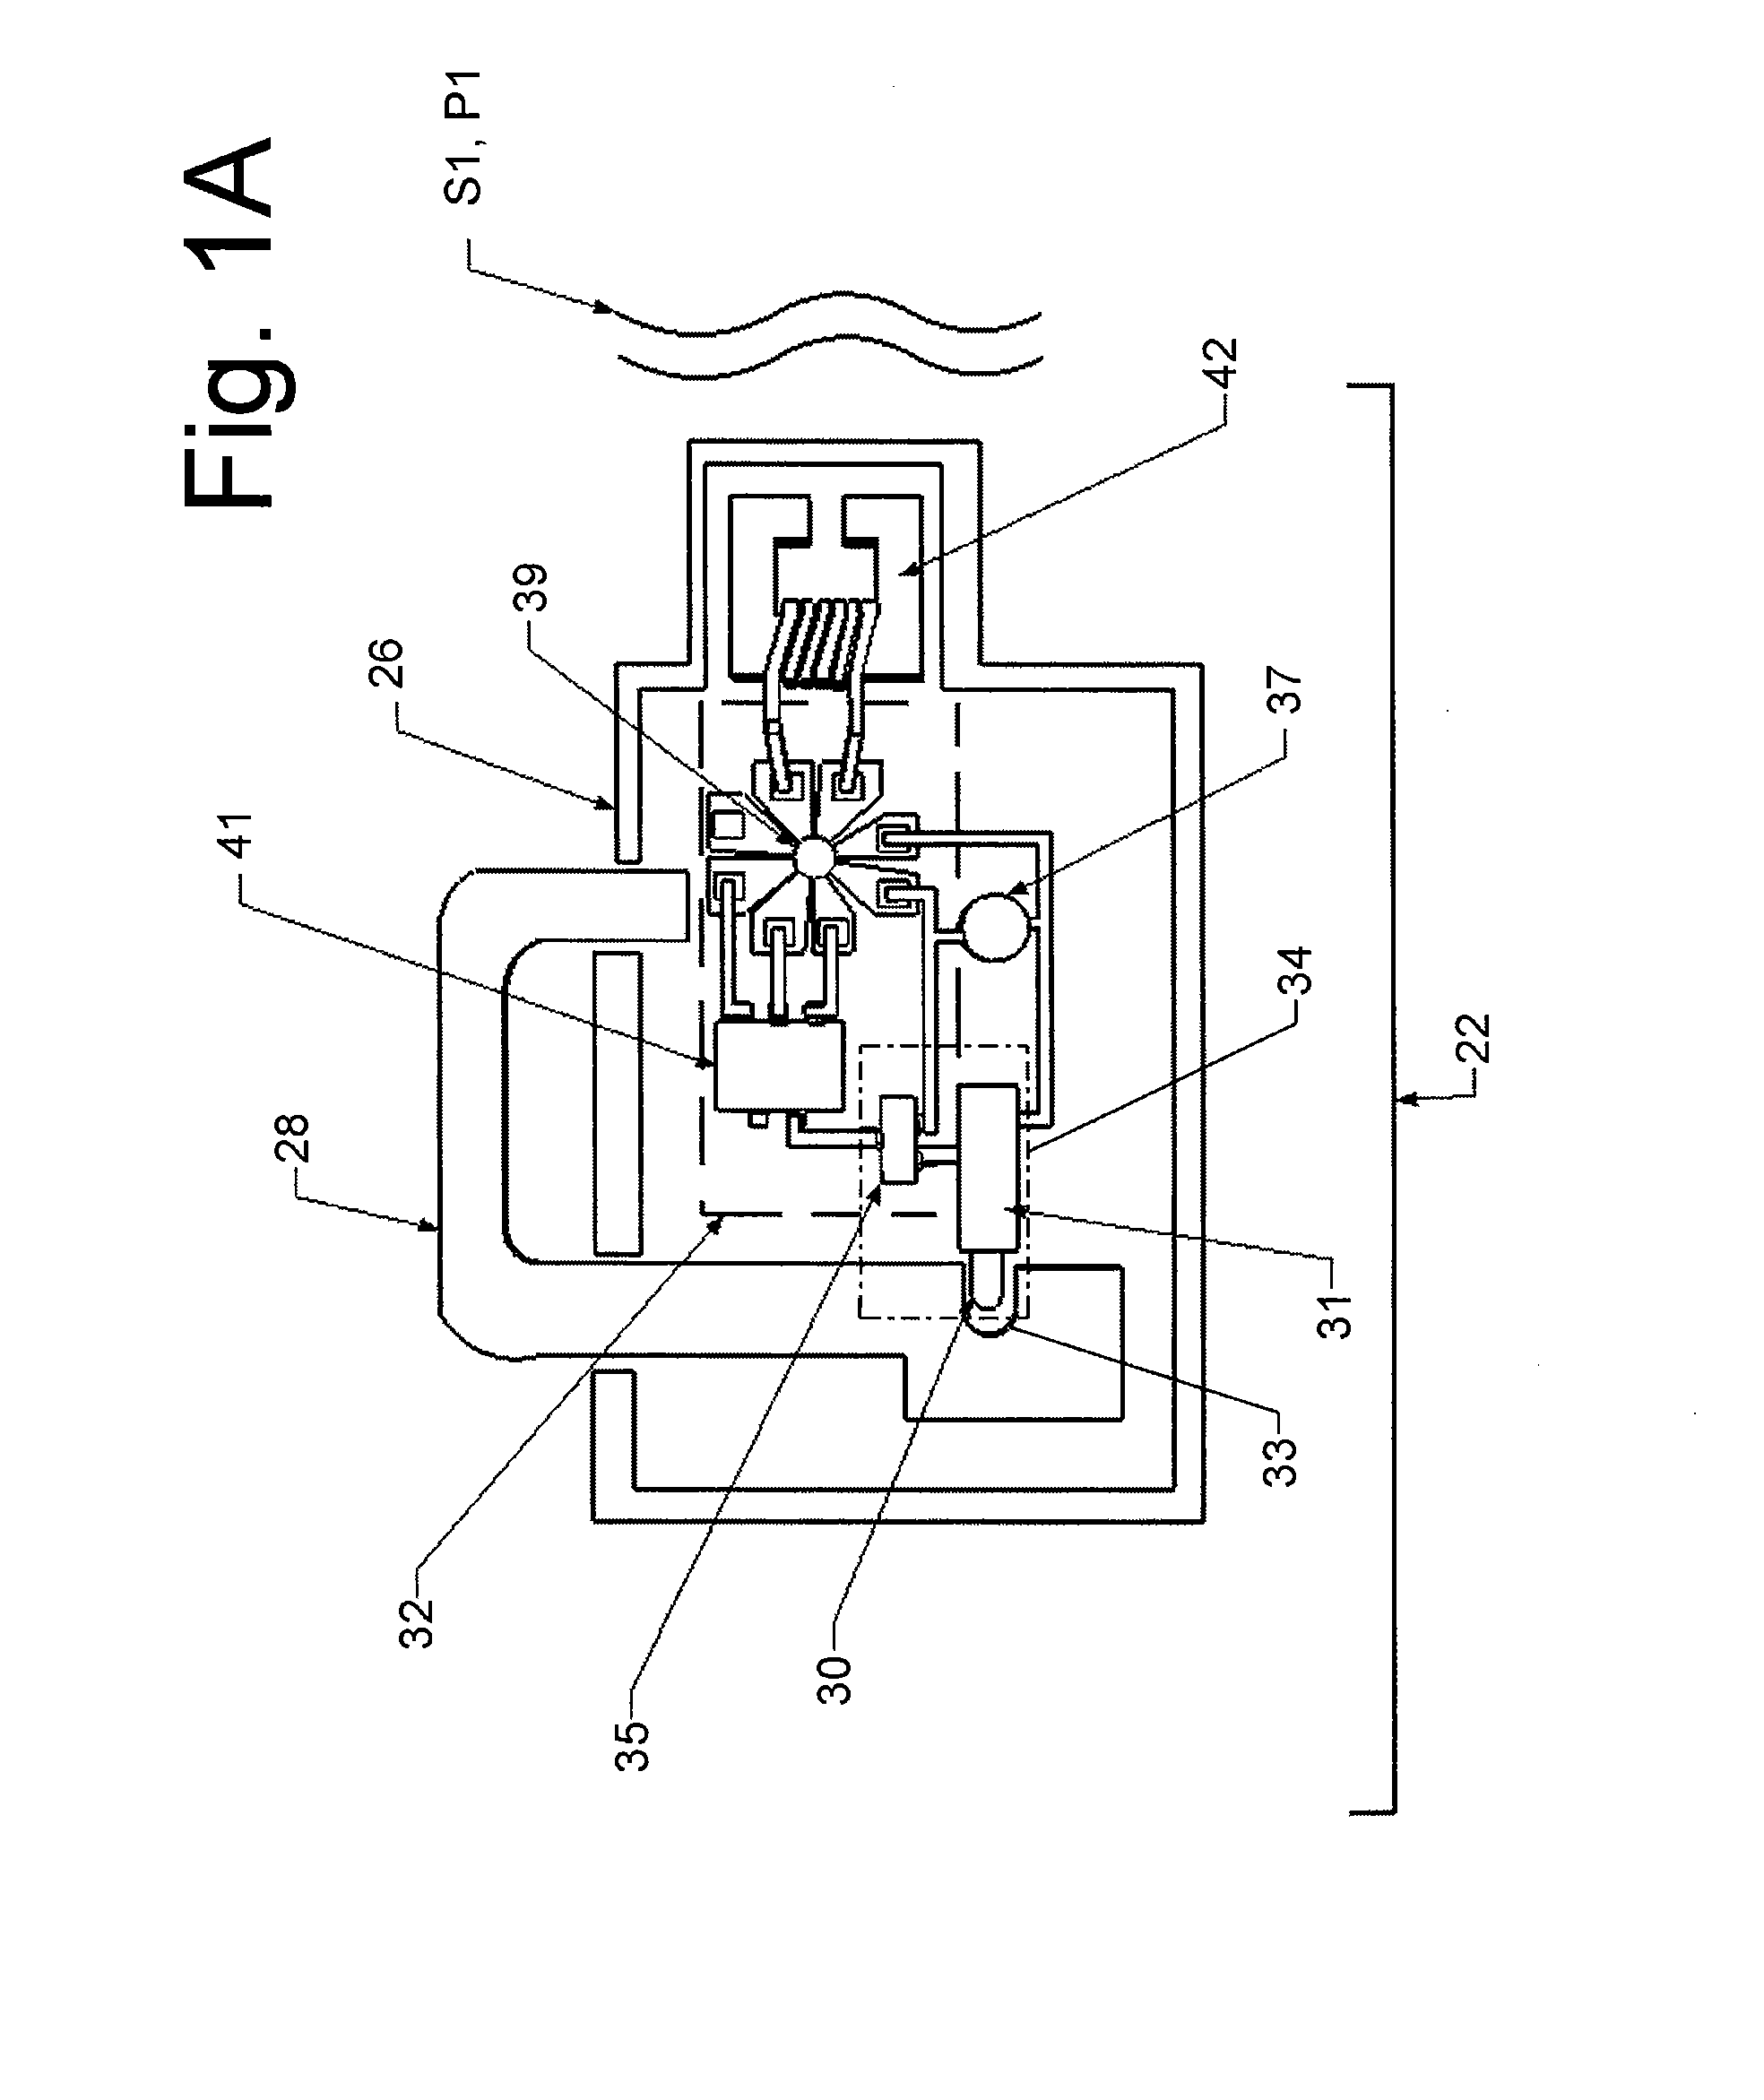 Systems and methods for providing universal security for items